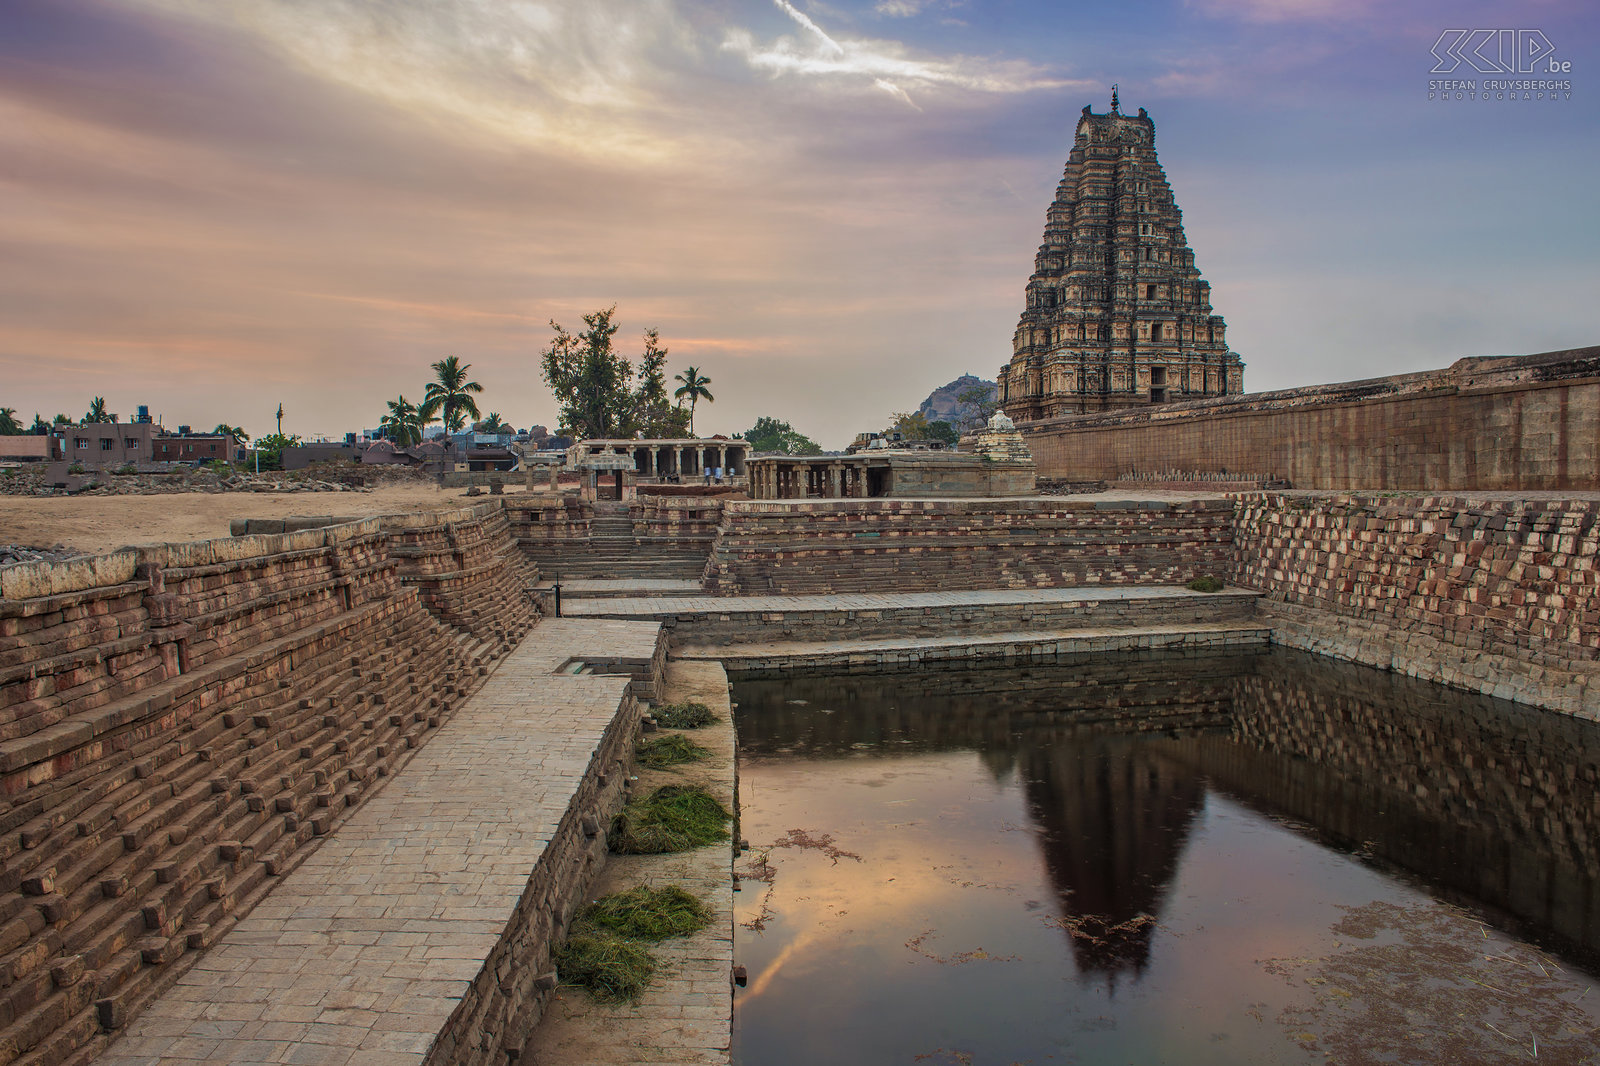 Hampi - Virupaksha temple Sunrise at the northern side of the Virupaksha temple in Hampi. The wonderful ancient city of Hampi is located in the state of Karnataka in southern India. In the 13th to 17th century it was the capital city of the Vijayanagara empire but it is believed that this temple has been built in the 7th century AD. This impressive temple is still a pilgrimage centre for the worshipers of lord Shiva. The eastern tower, called Gopura, is 49m high and has 9 stories. Stefan Cruysberghs